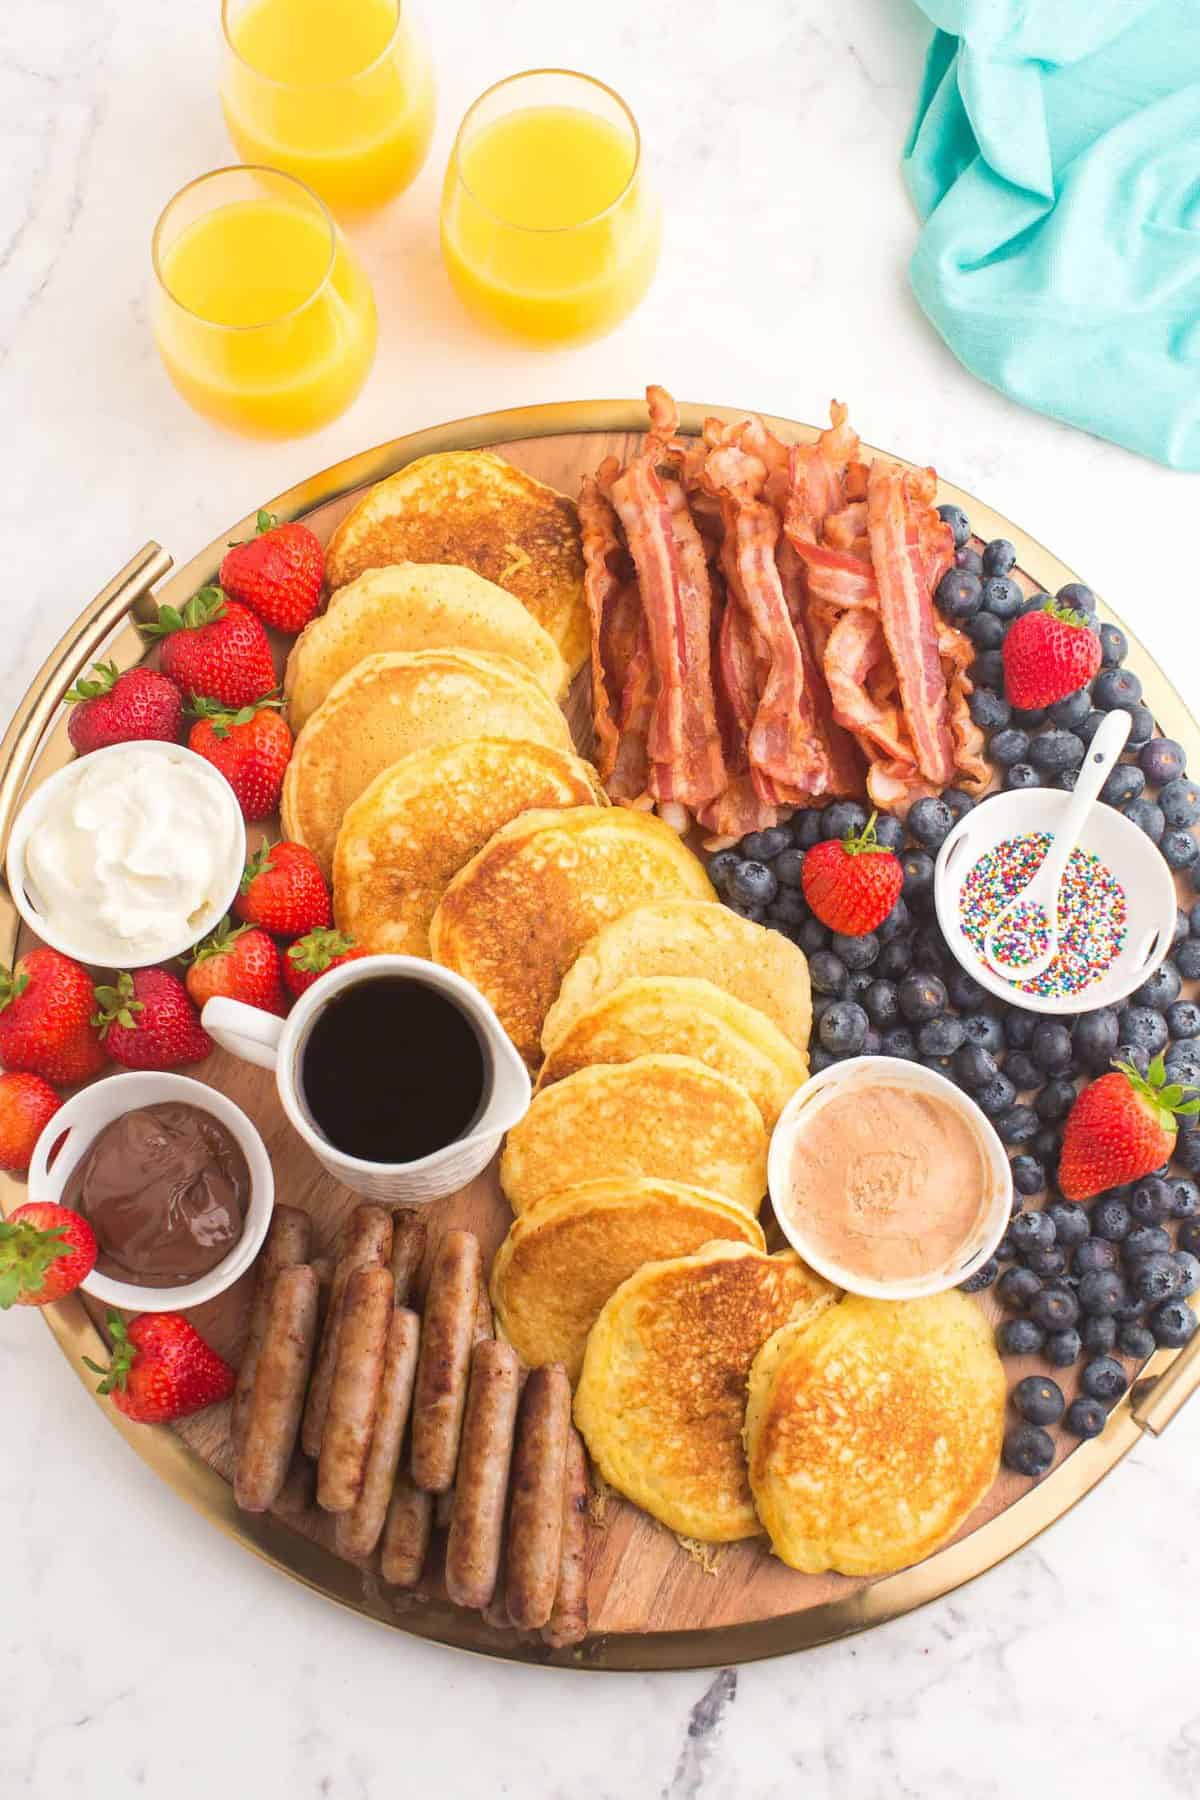 Overhead view of a breakfast spread arranged on a board, including pancakes, bacon, sausage, and fruit.